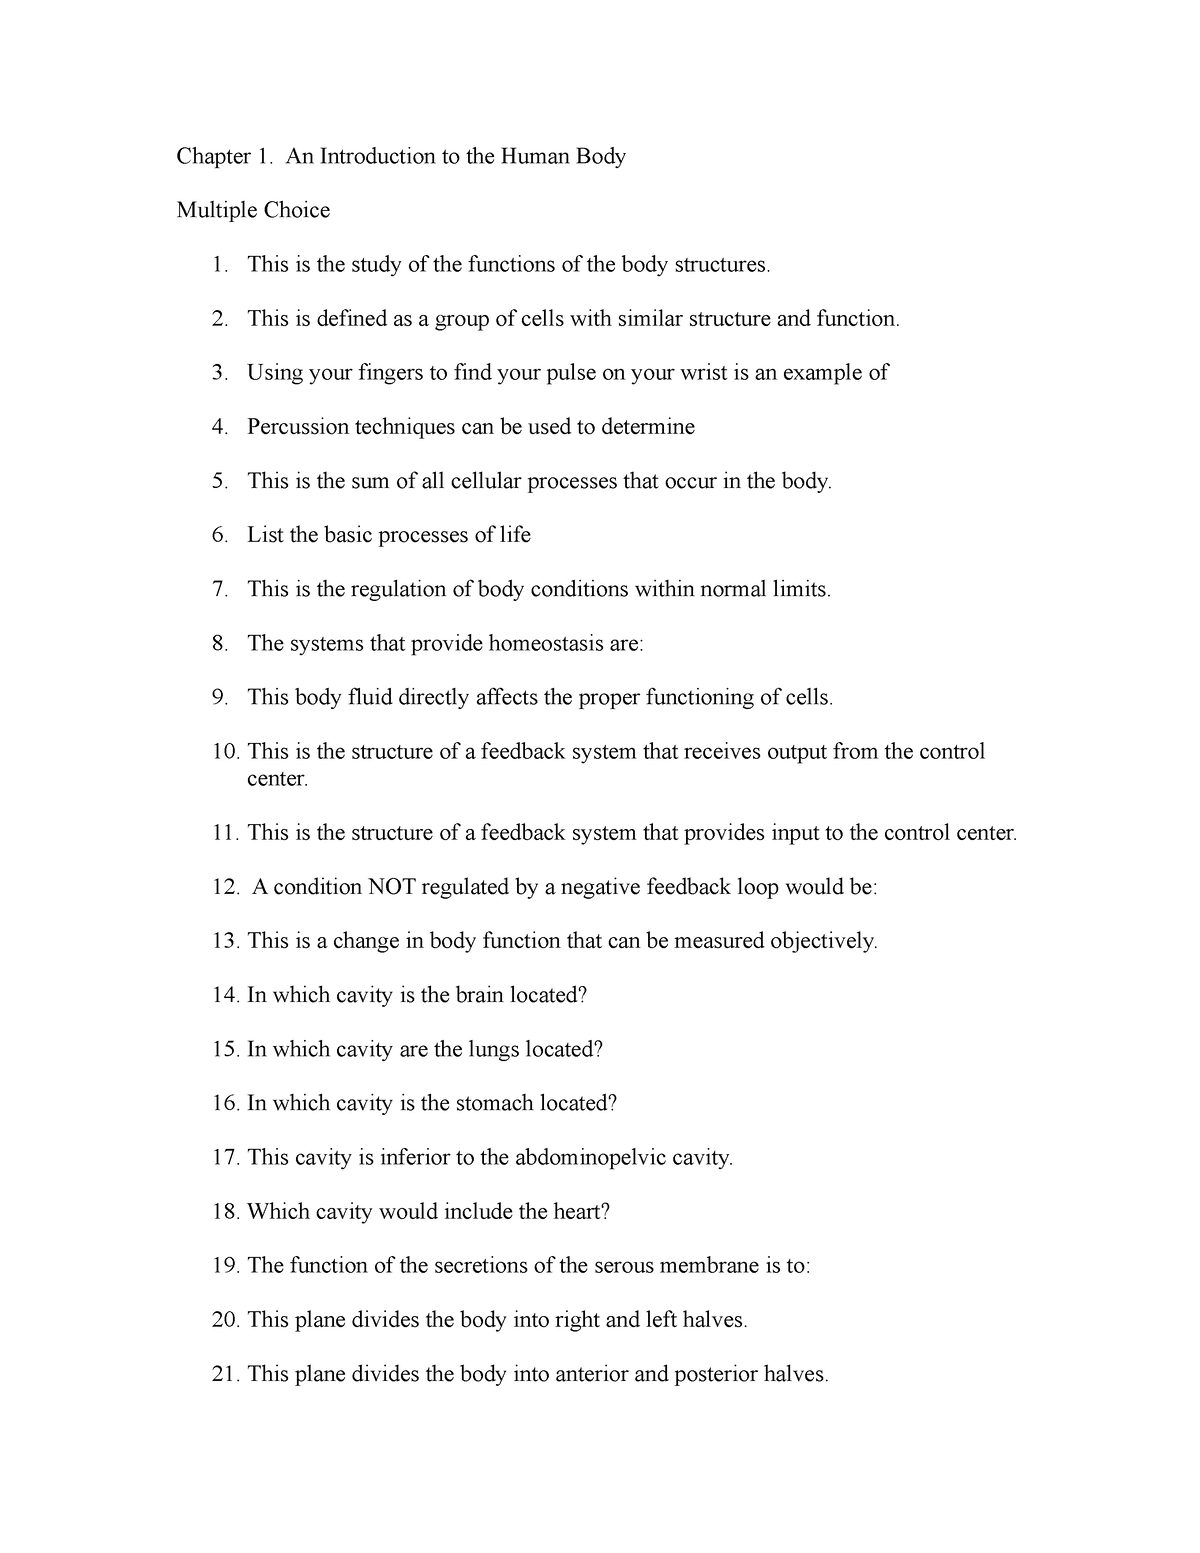 chapter-1-test-organization-of-the-human-body-worksheet-chapter-1-an